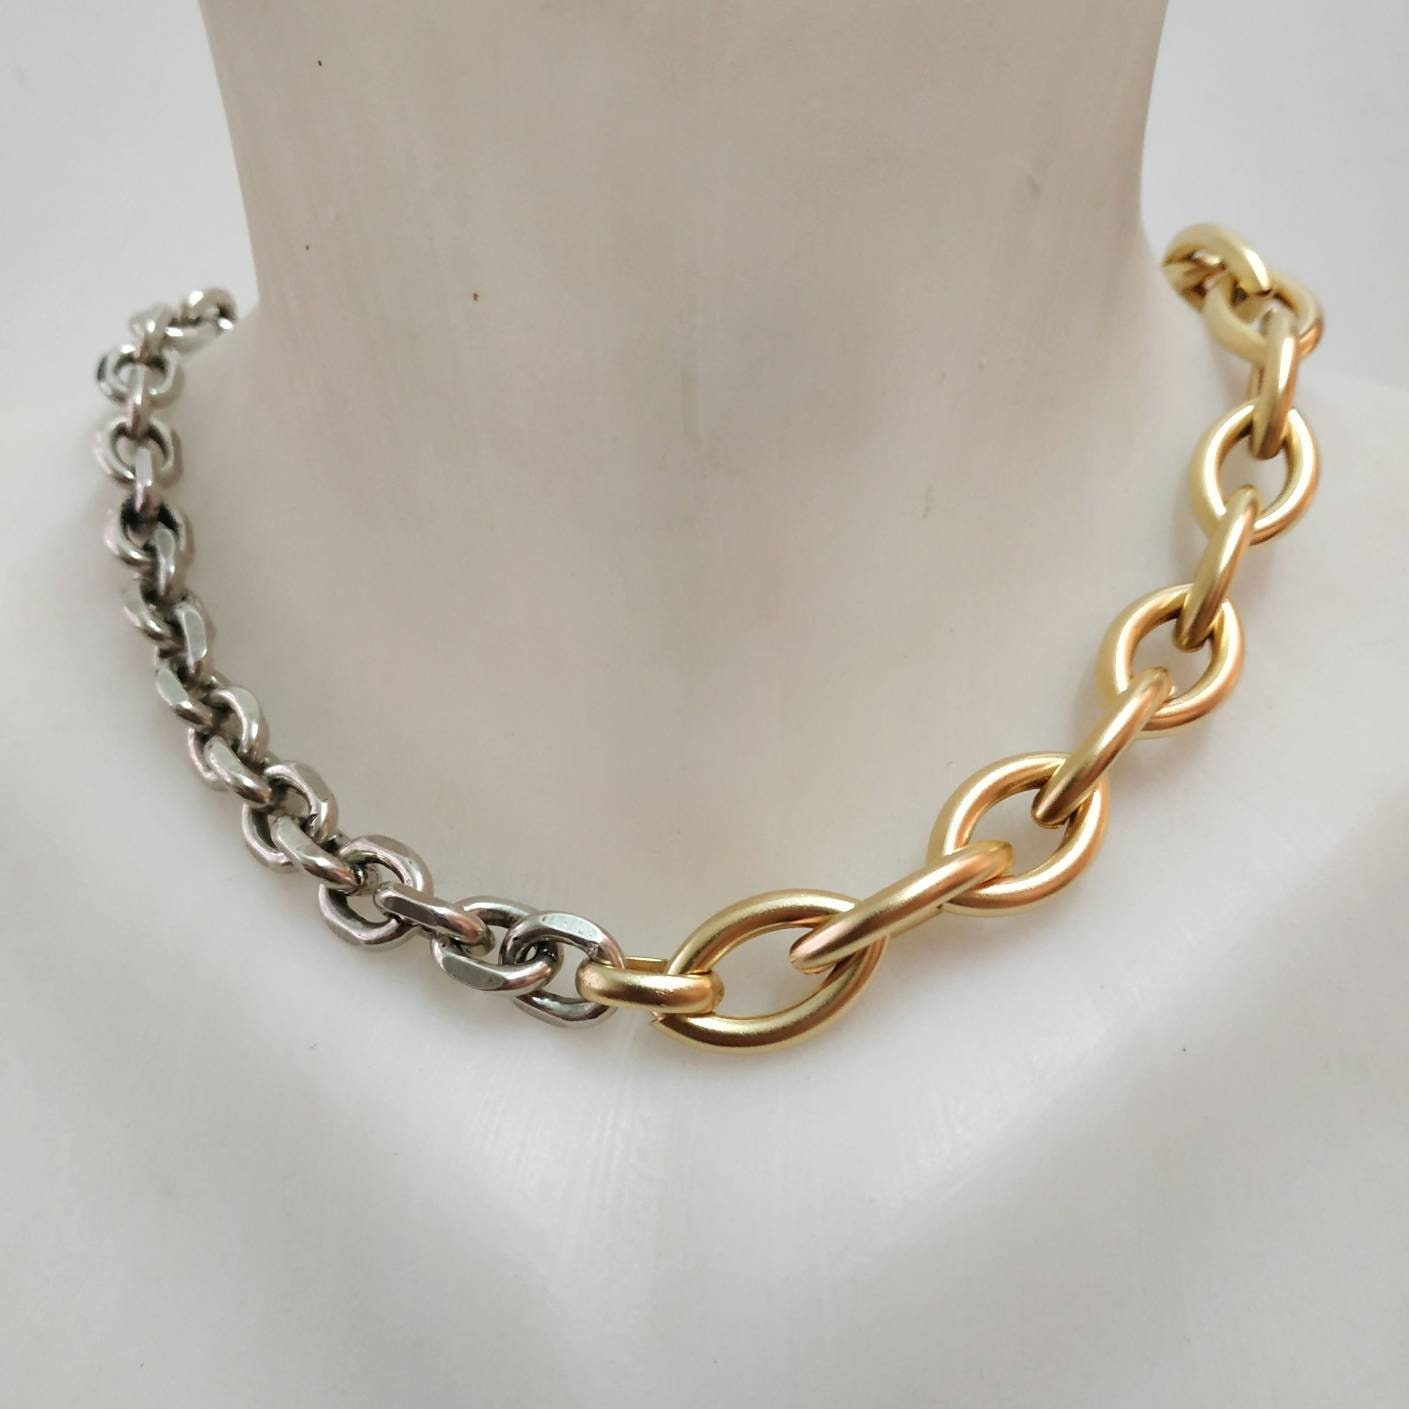 Mixed Metal Toggle Clasp Necklace / Gold & Silver / Geometric